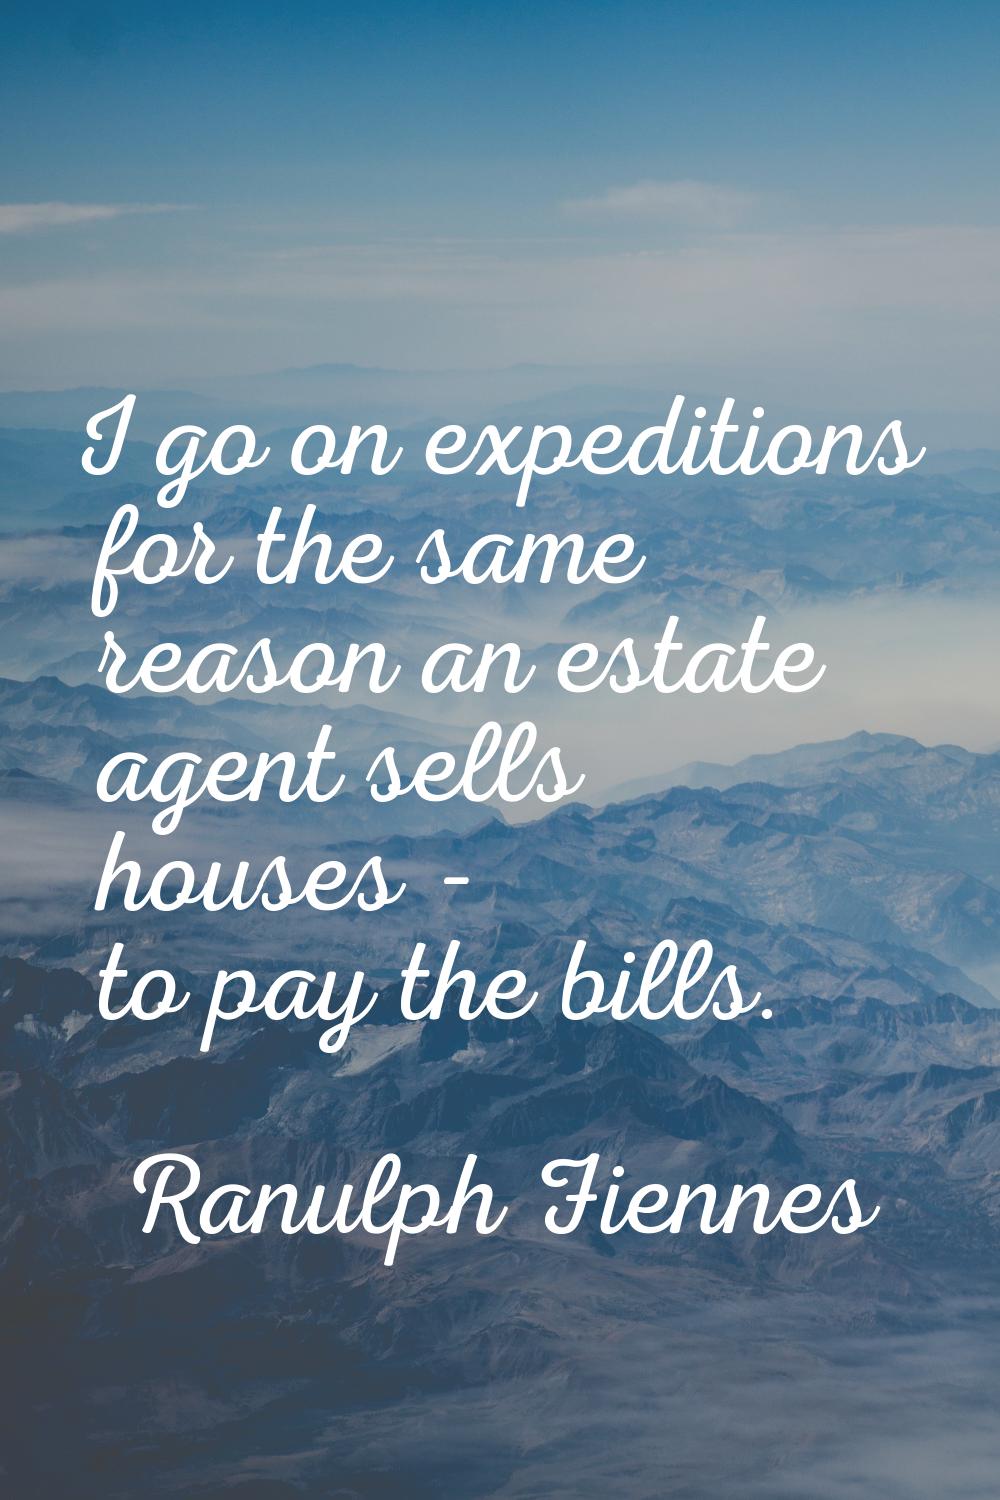 I go on expeditions for the same reason an estate agent sells houses - to pay the bills.